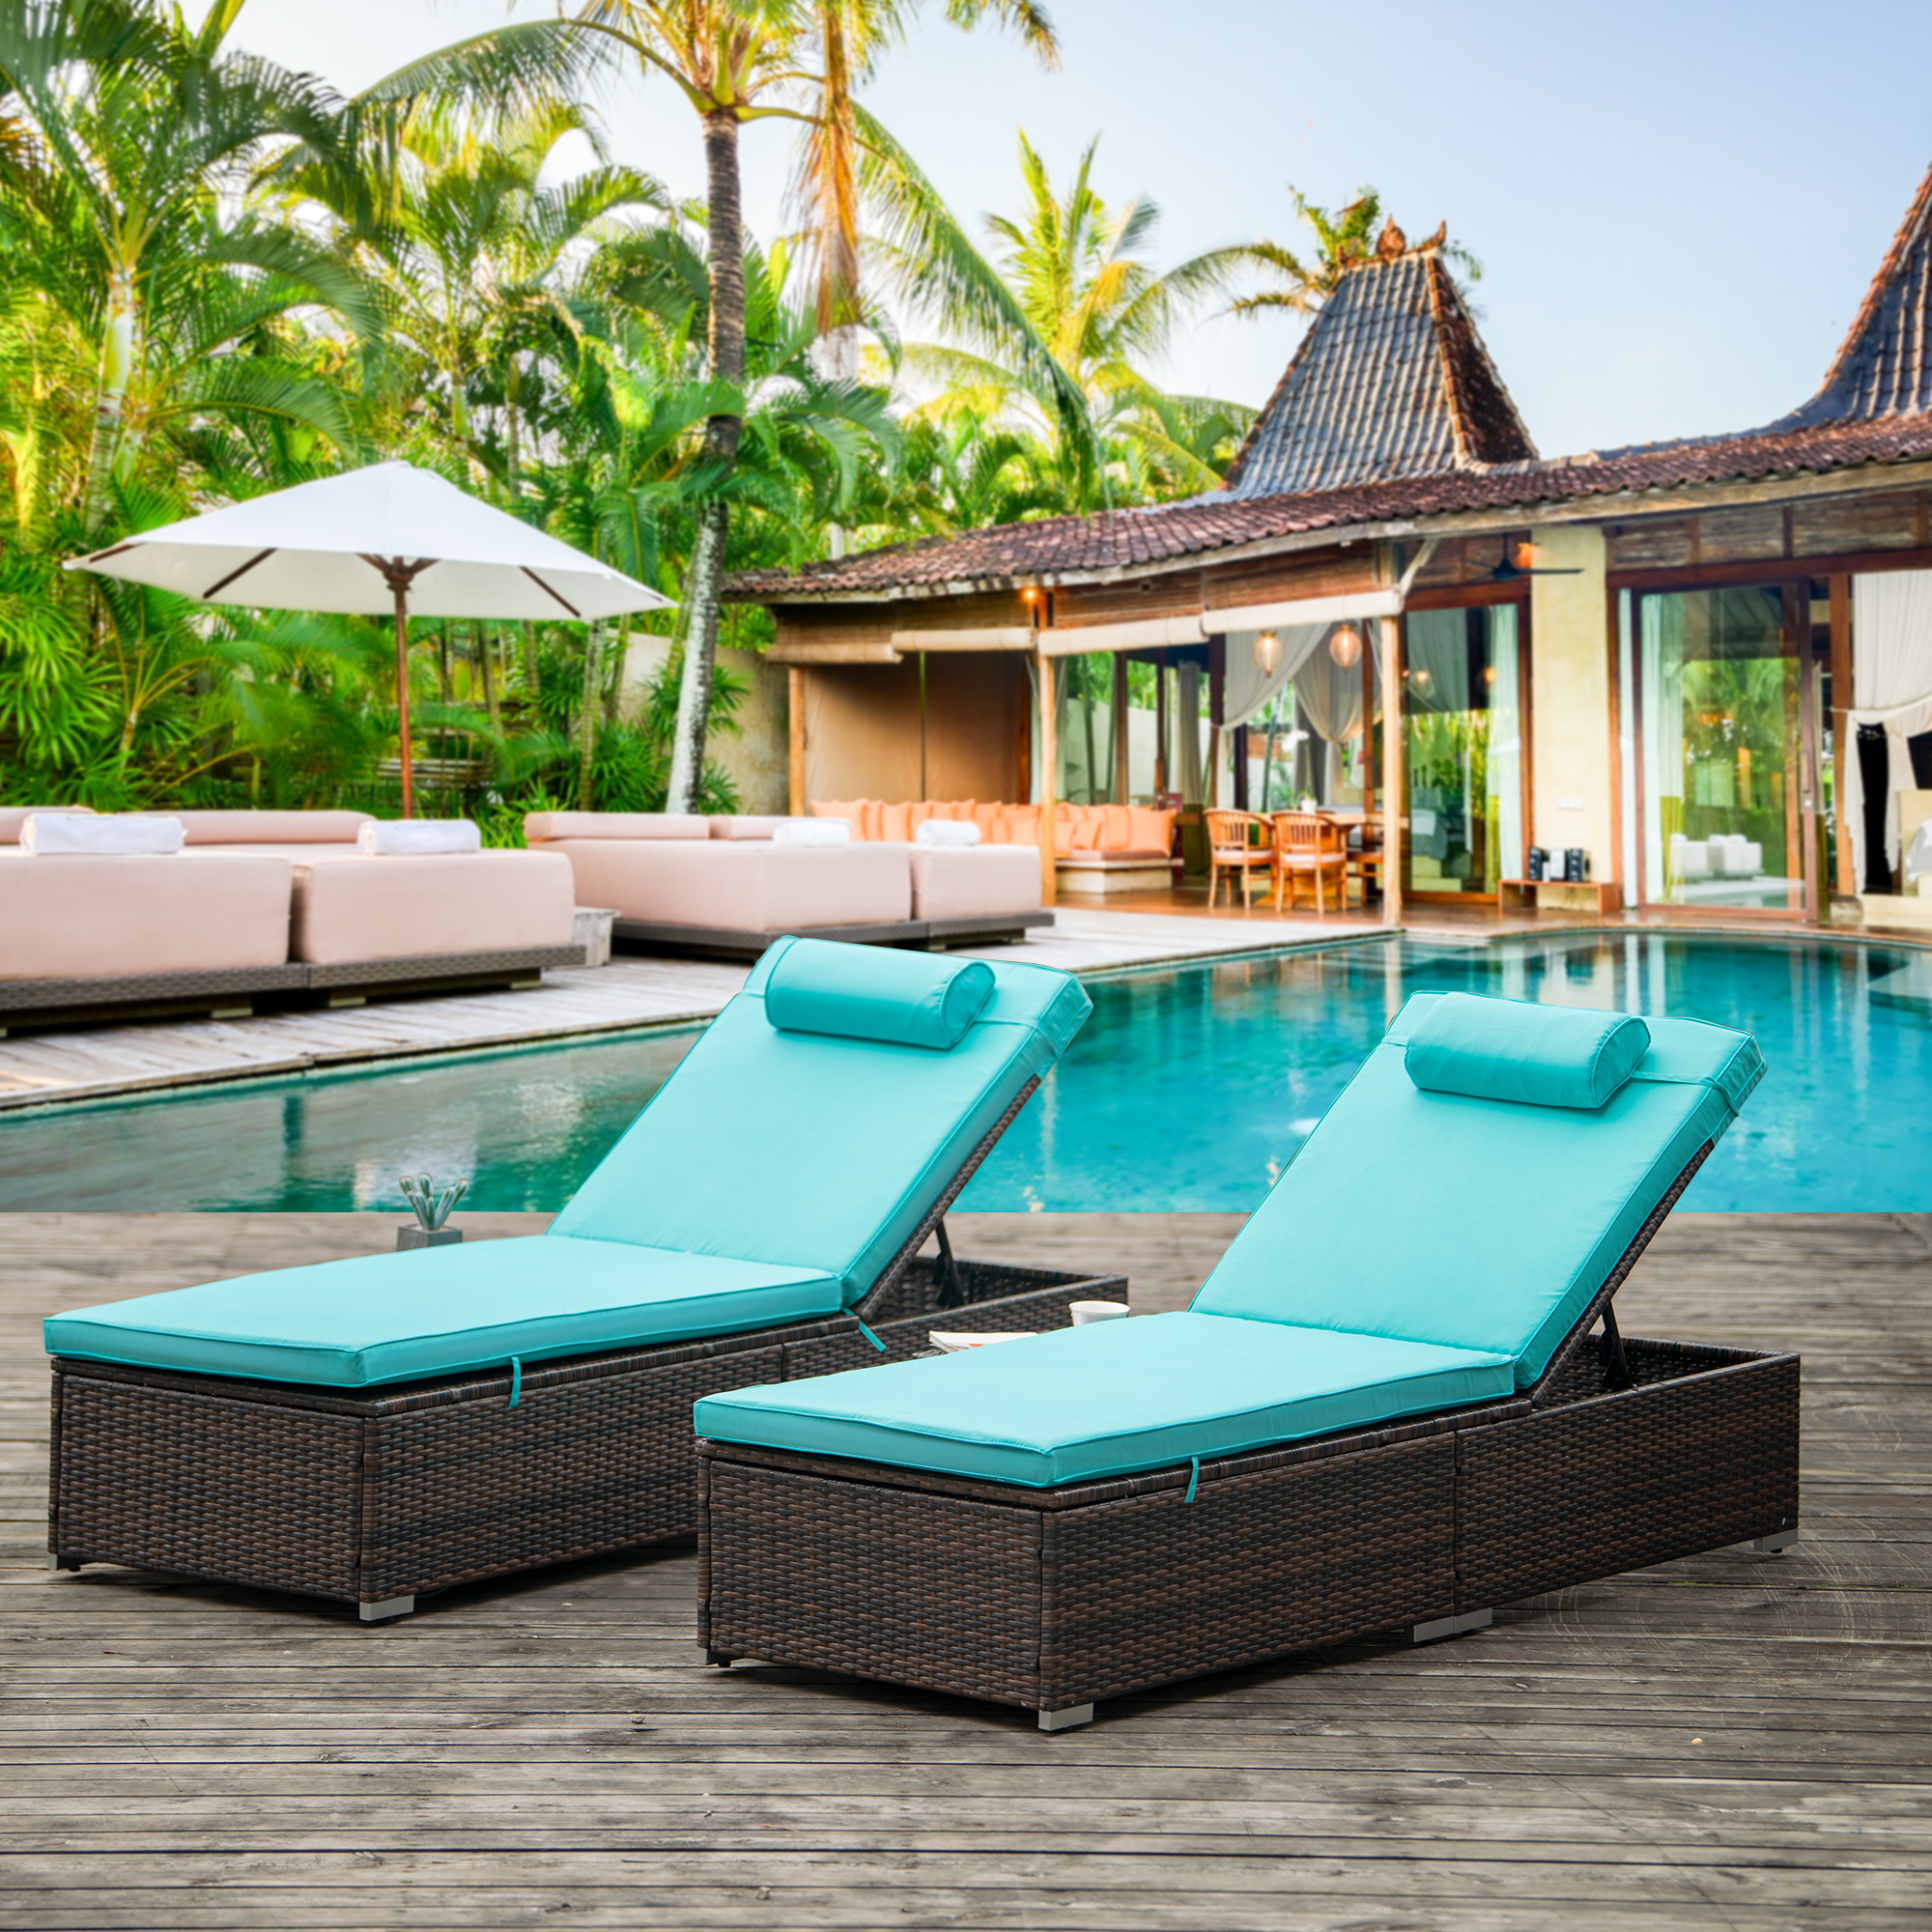 Patio Lounge Chairs Set of 2, Outdoor Chaise Lounges Chairs with with Cup Table, 5 Backrest Angles, and Removable Cushions, PE Rattan Backrest Lounger Chairs Set for Pool Porch Backyard Patio - image 2 of 10